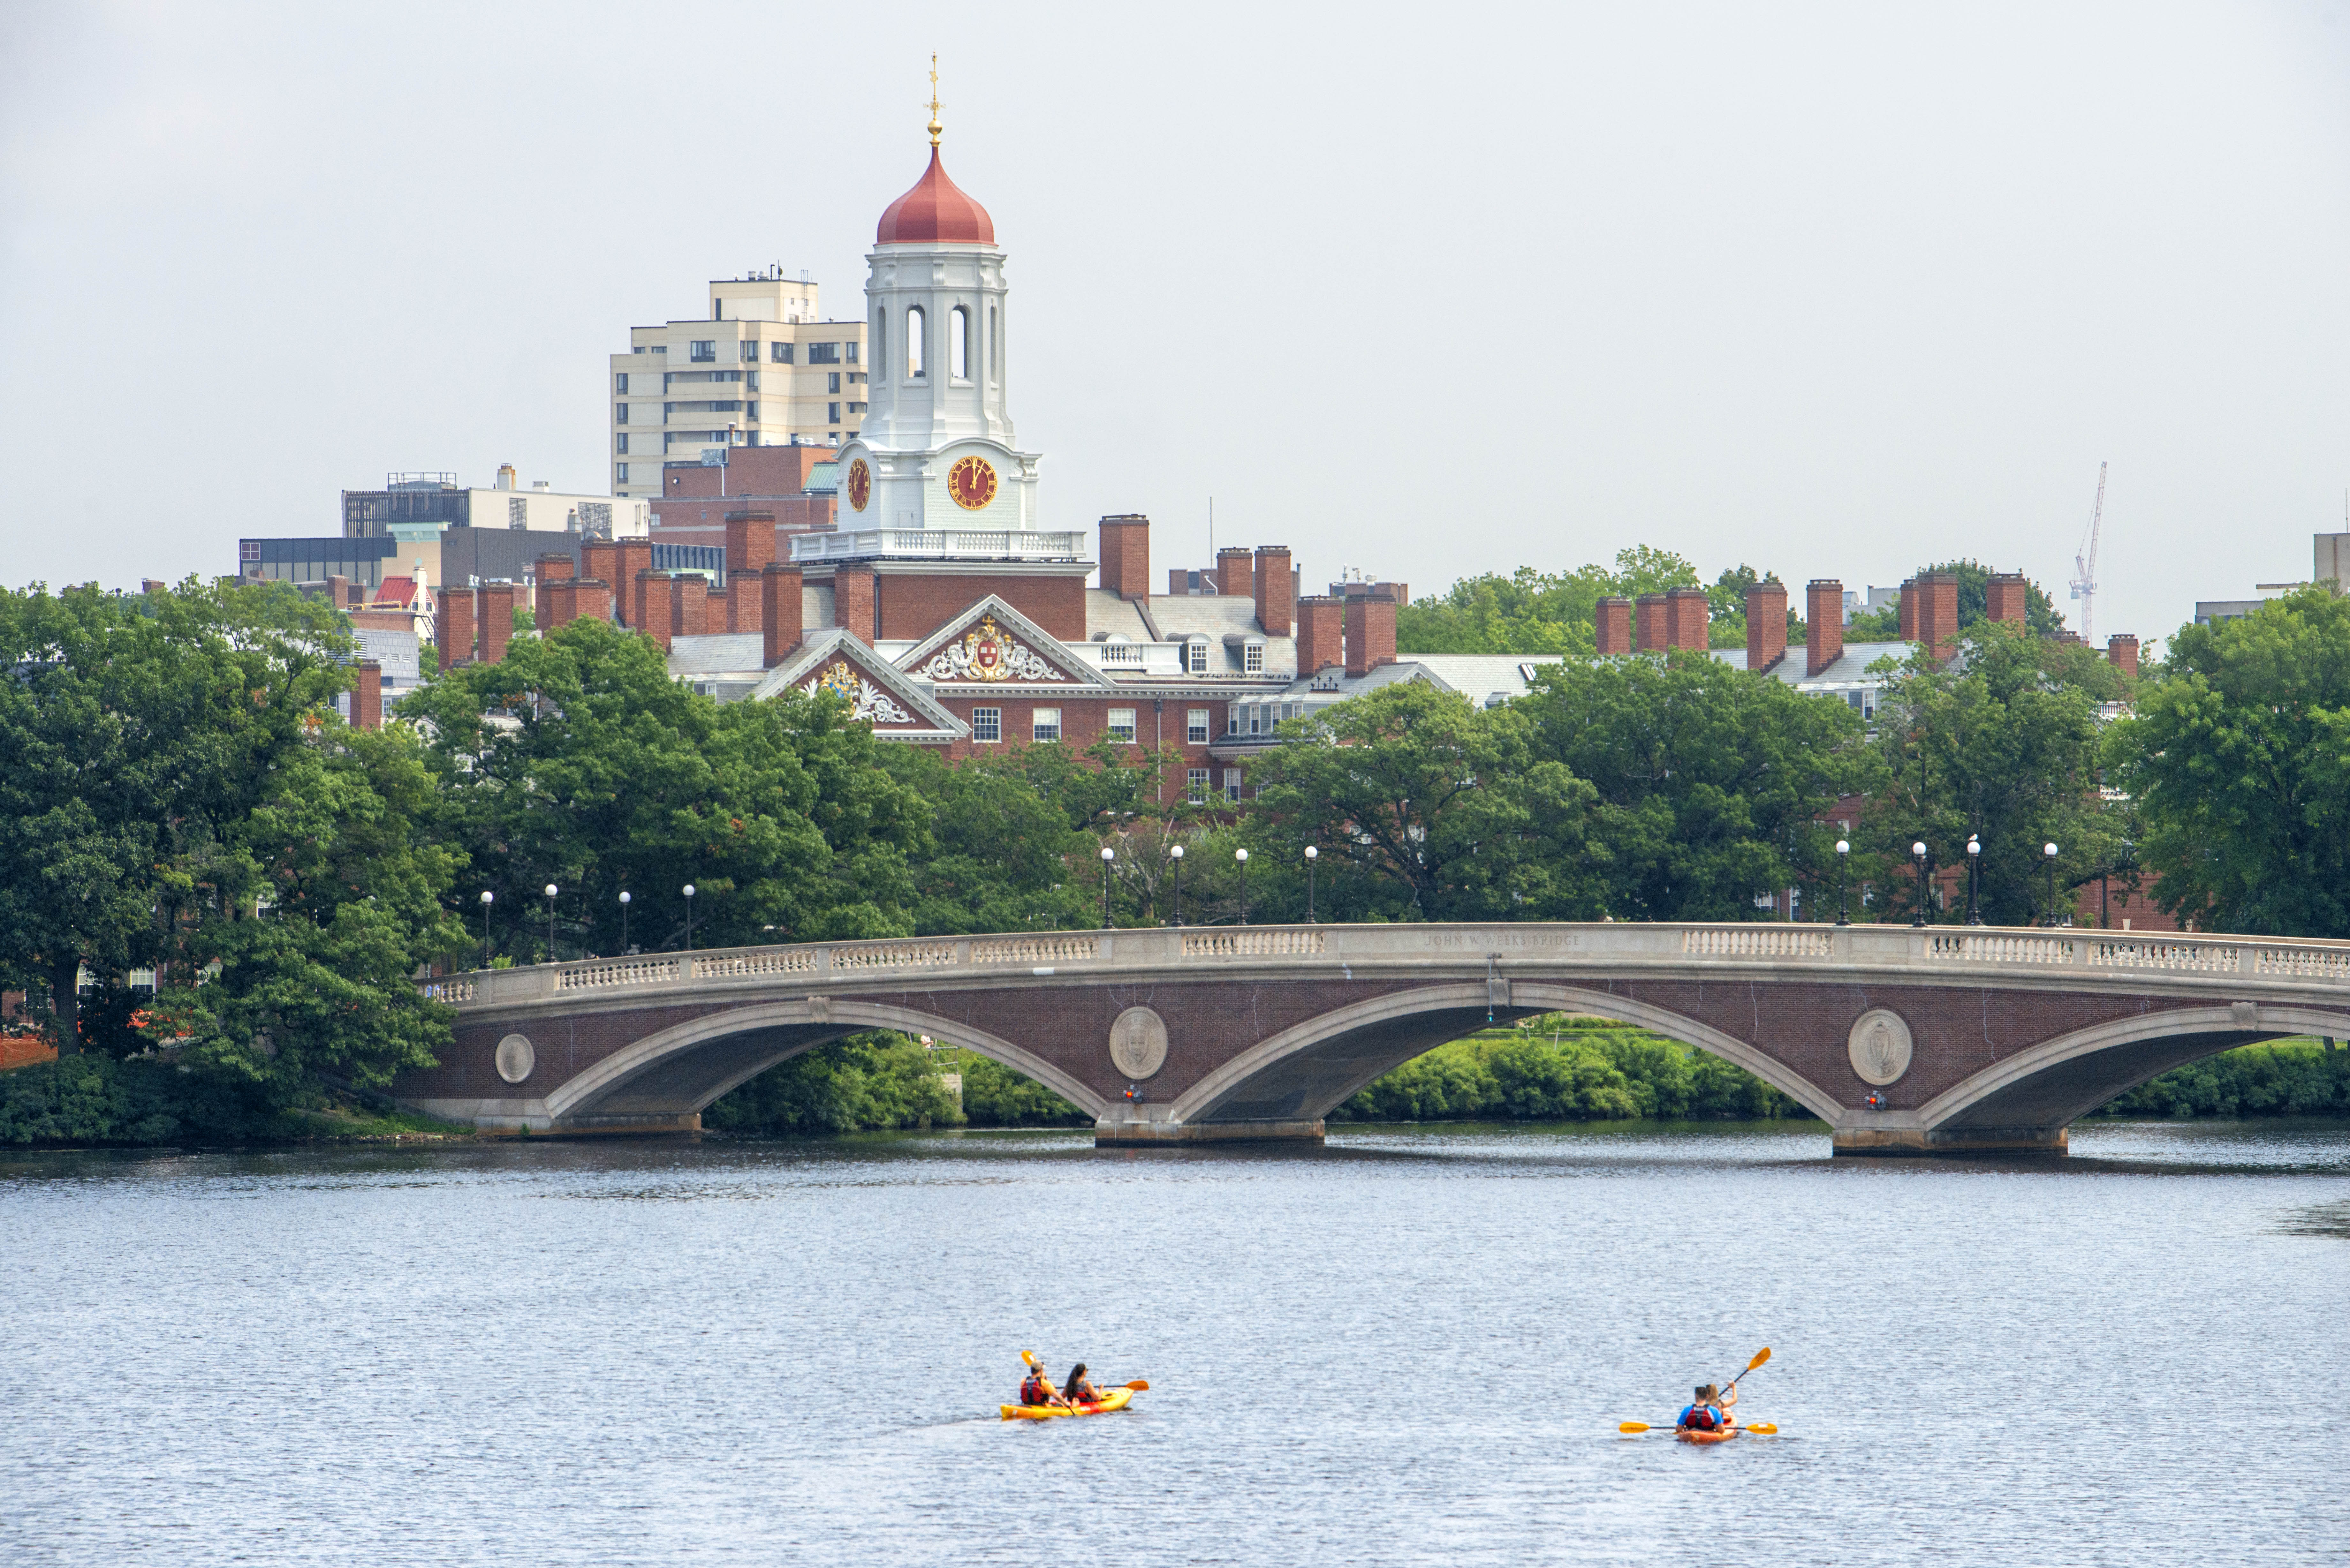 A photo of a river in the foreground, with kayakers and a bridge. In the backround is a clock tower and buildings of Harvard University campus.